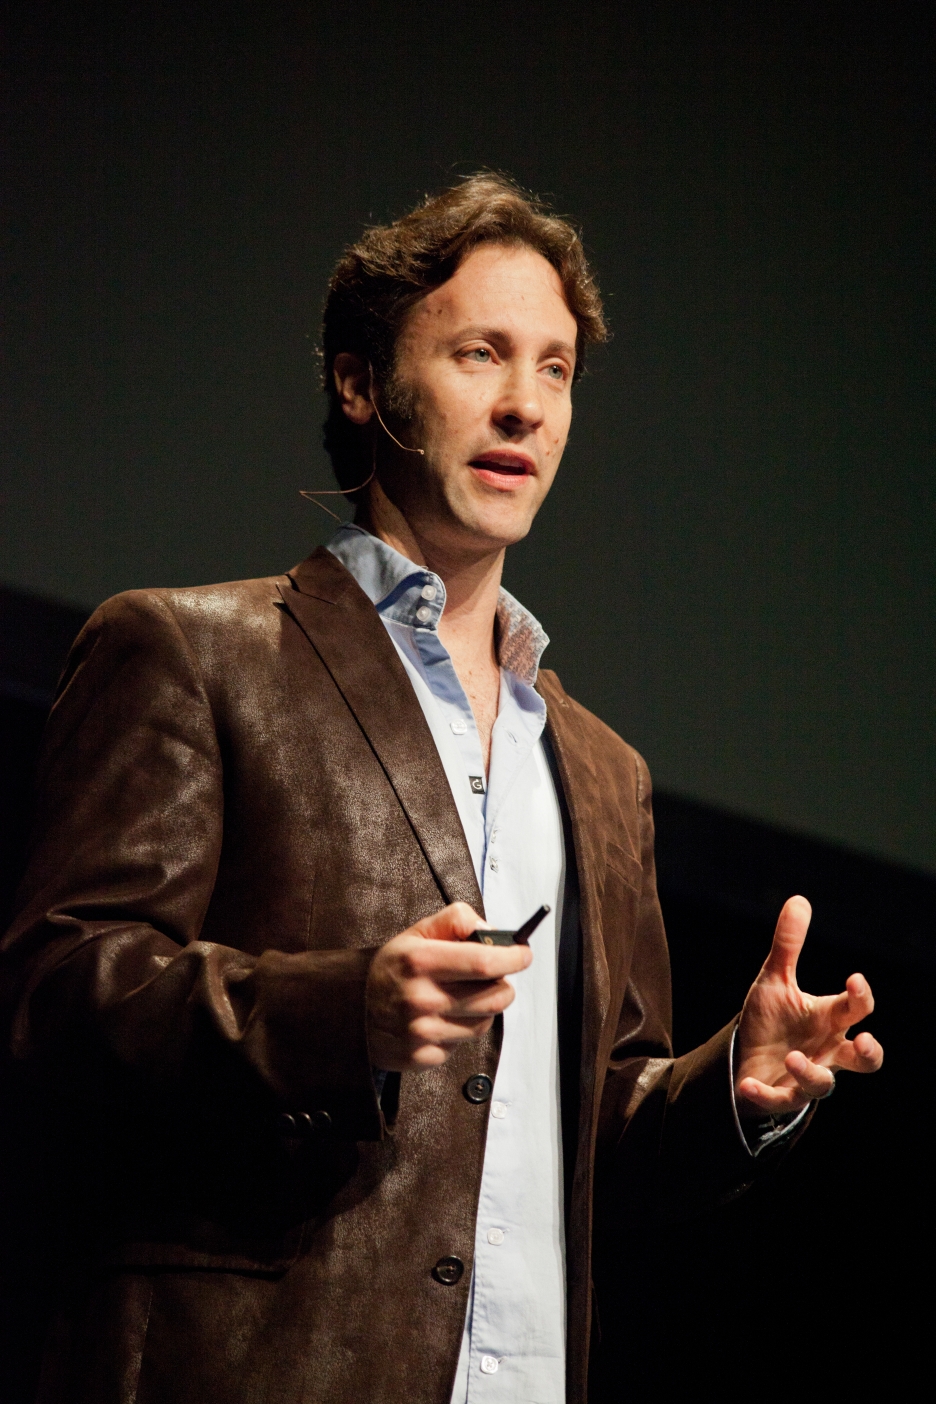 Dr. David Eagleman. Courtesy of the UP Experience